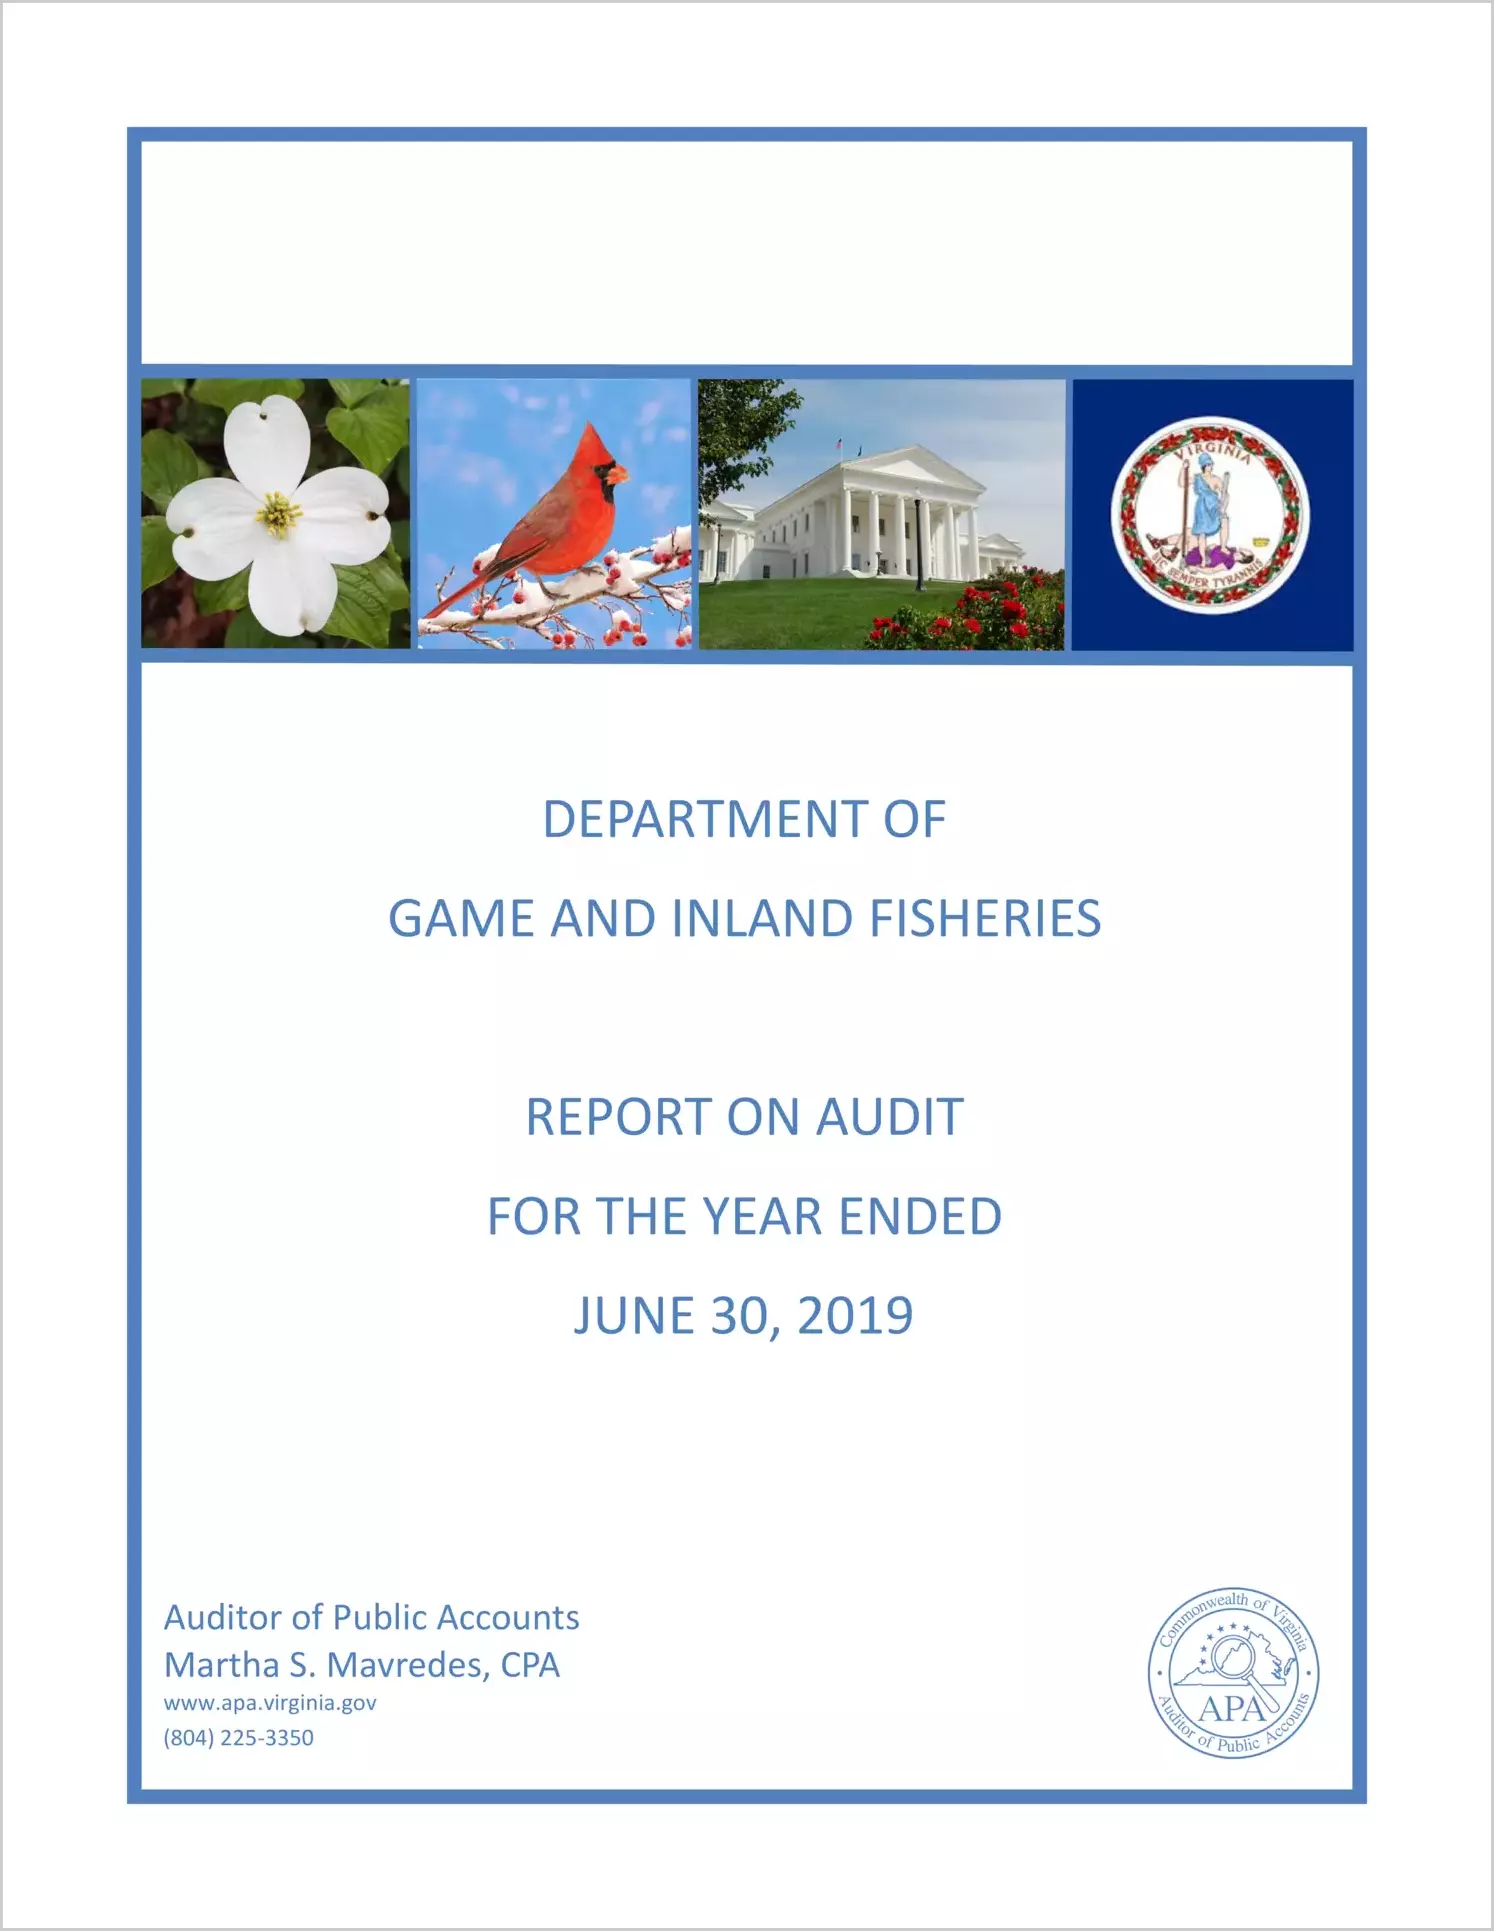 Department of Game and Inland Fisheries for the year ended June 30, 2019